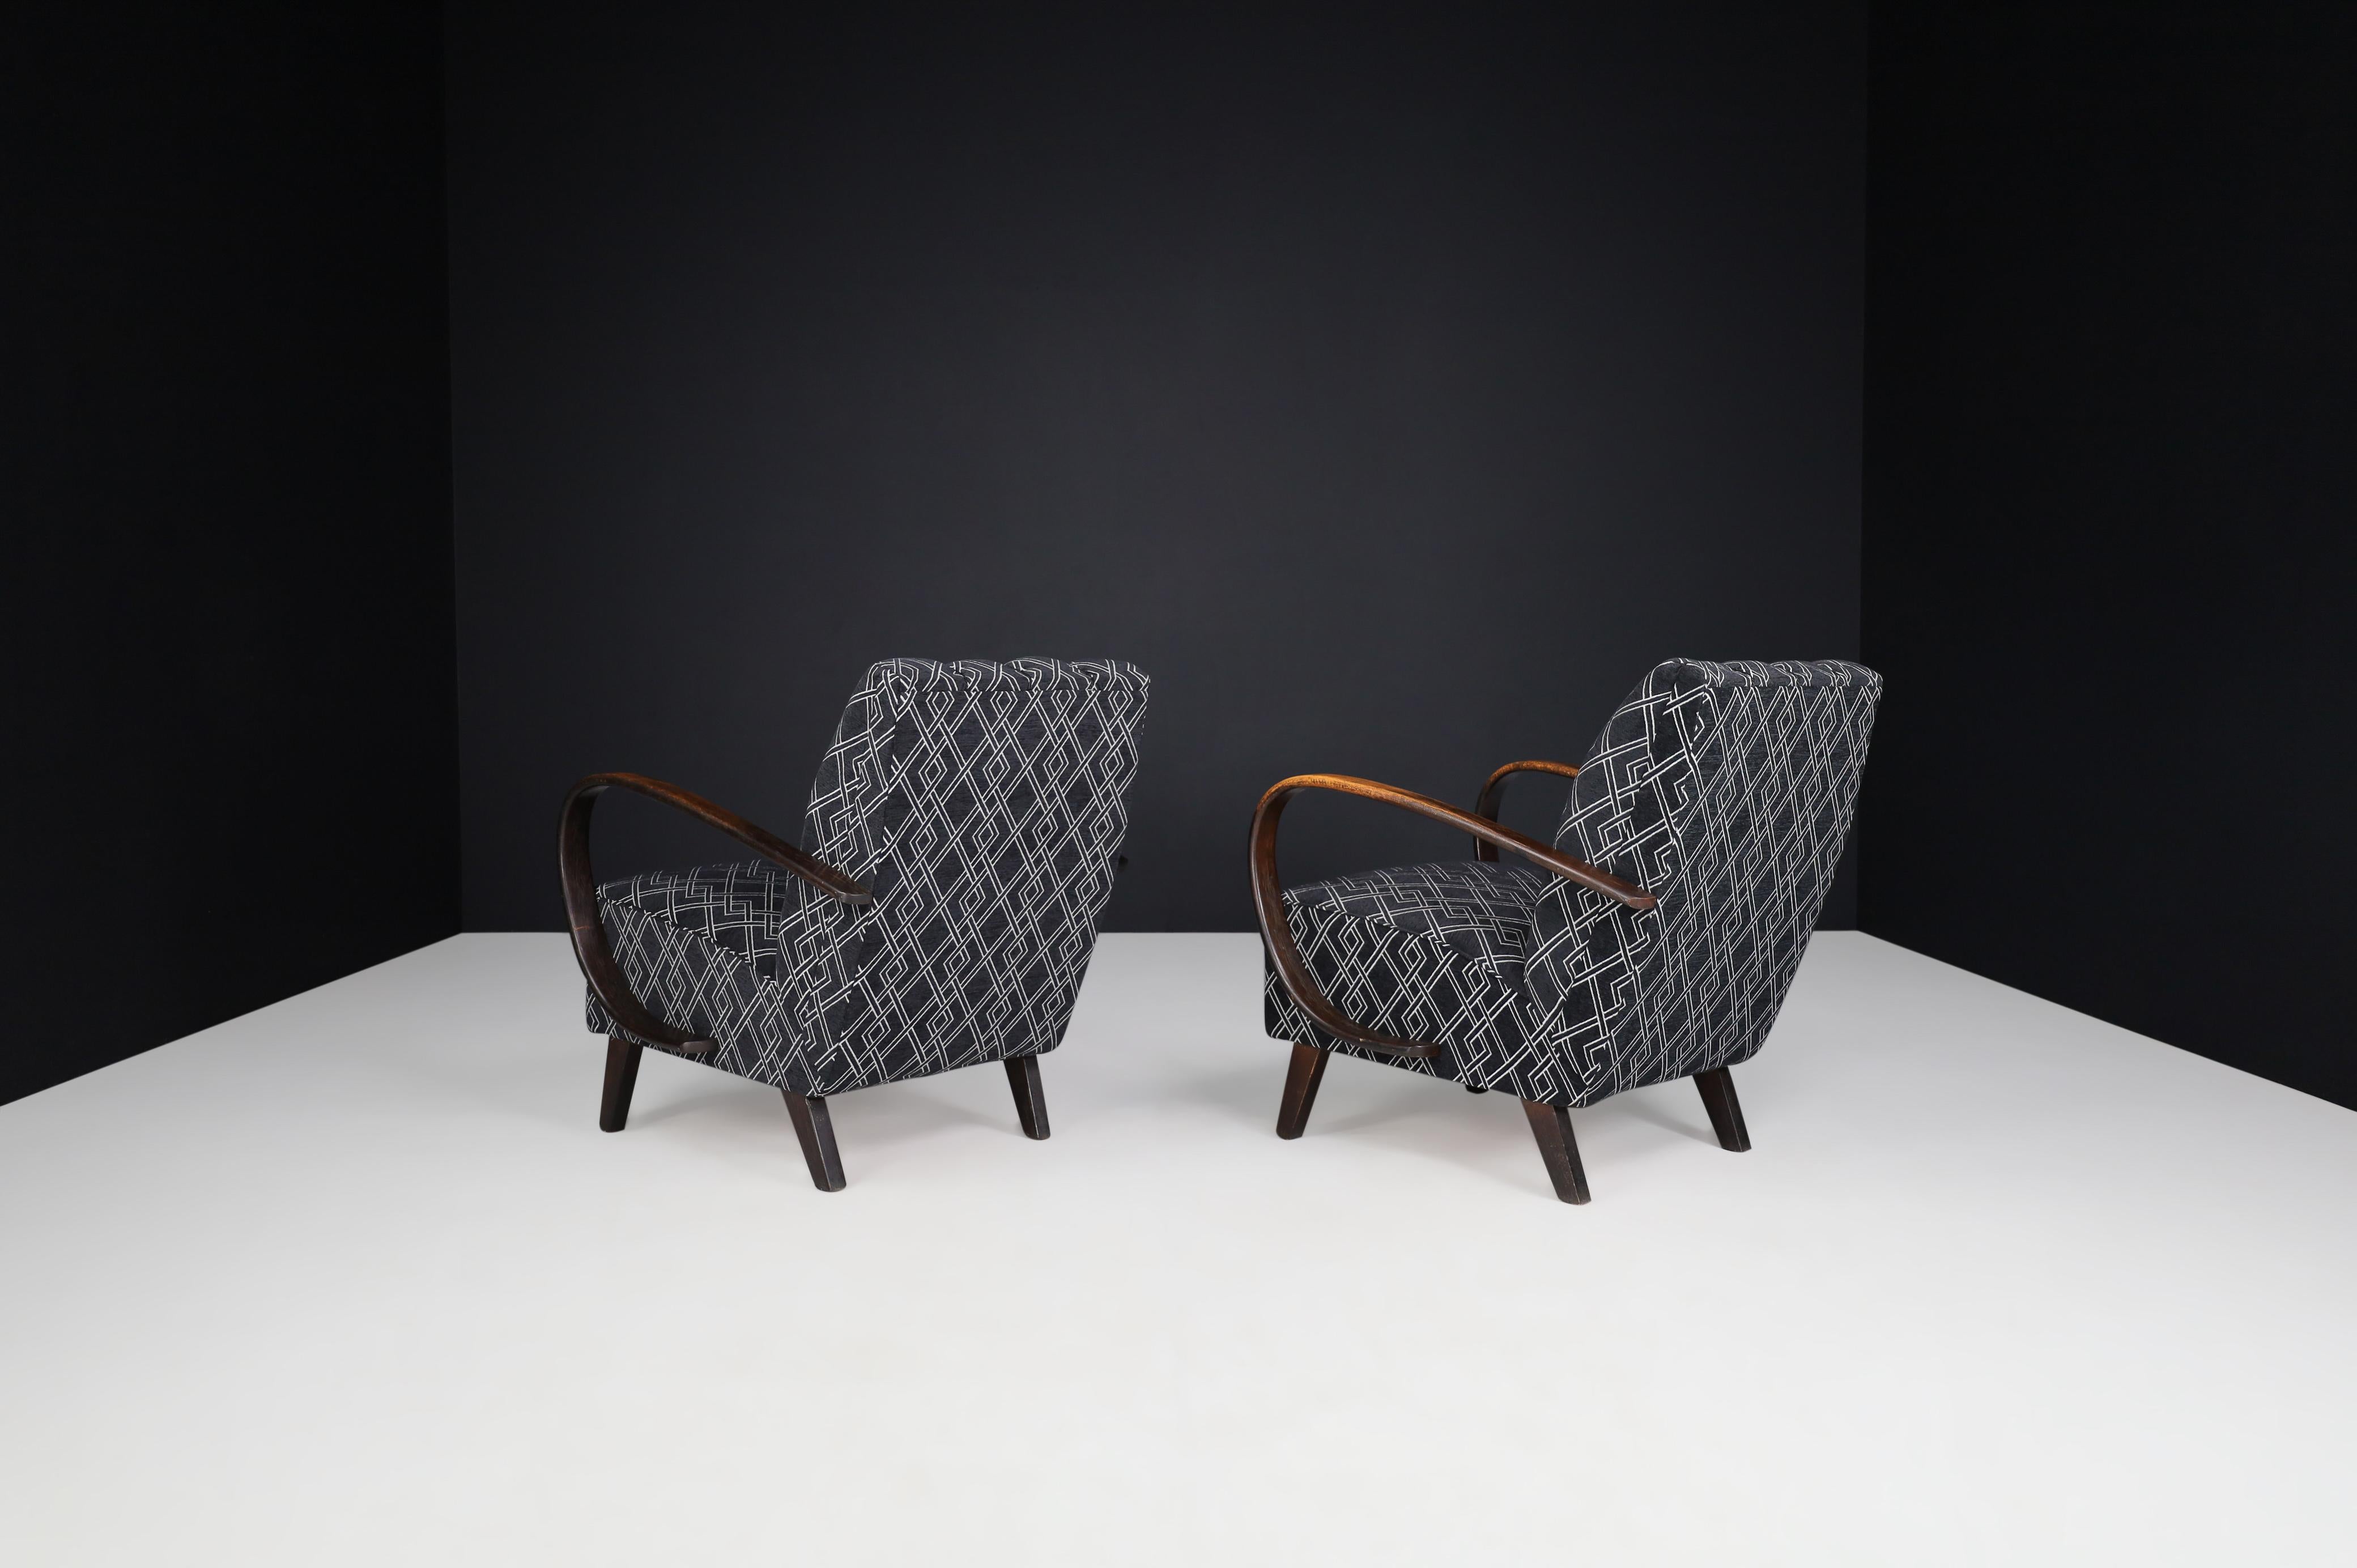 Czech Jindrich Halabala Re-Upholstered Patinated Bentwood Lounge Chairs, 1940s For Sale